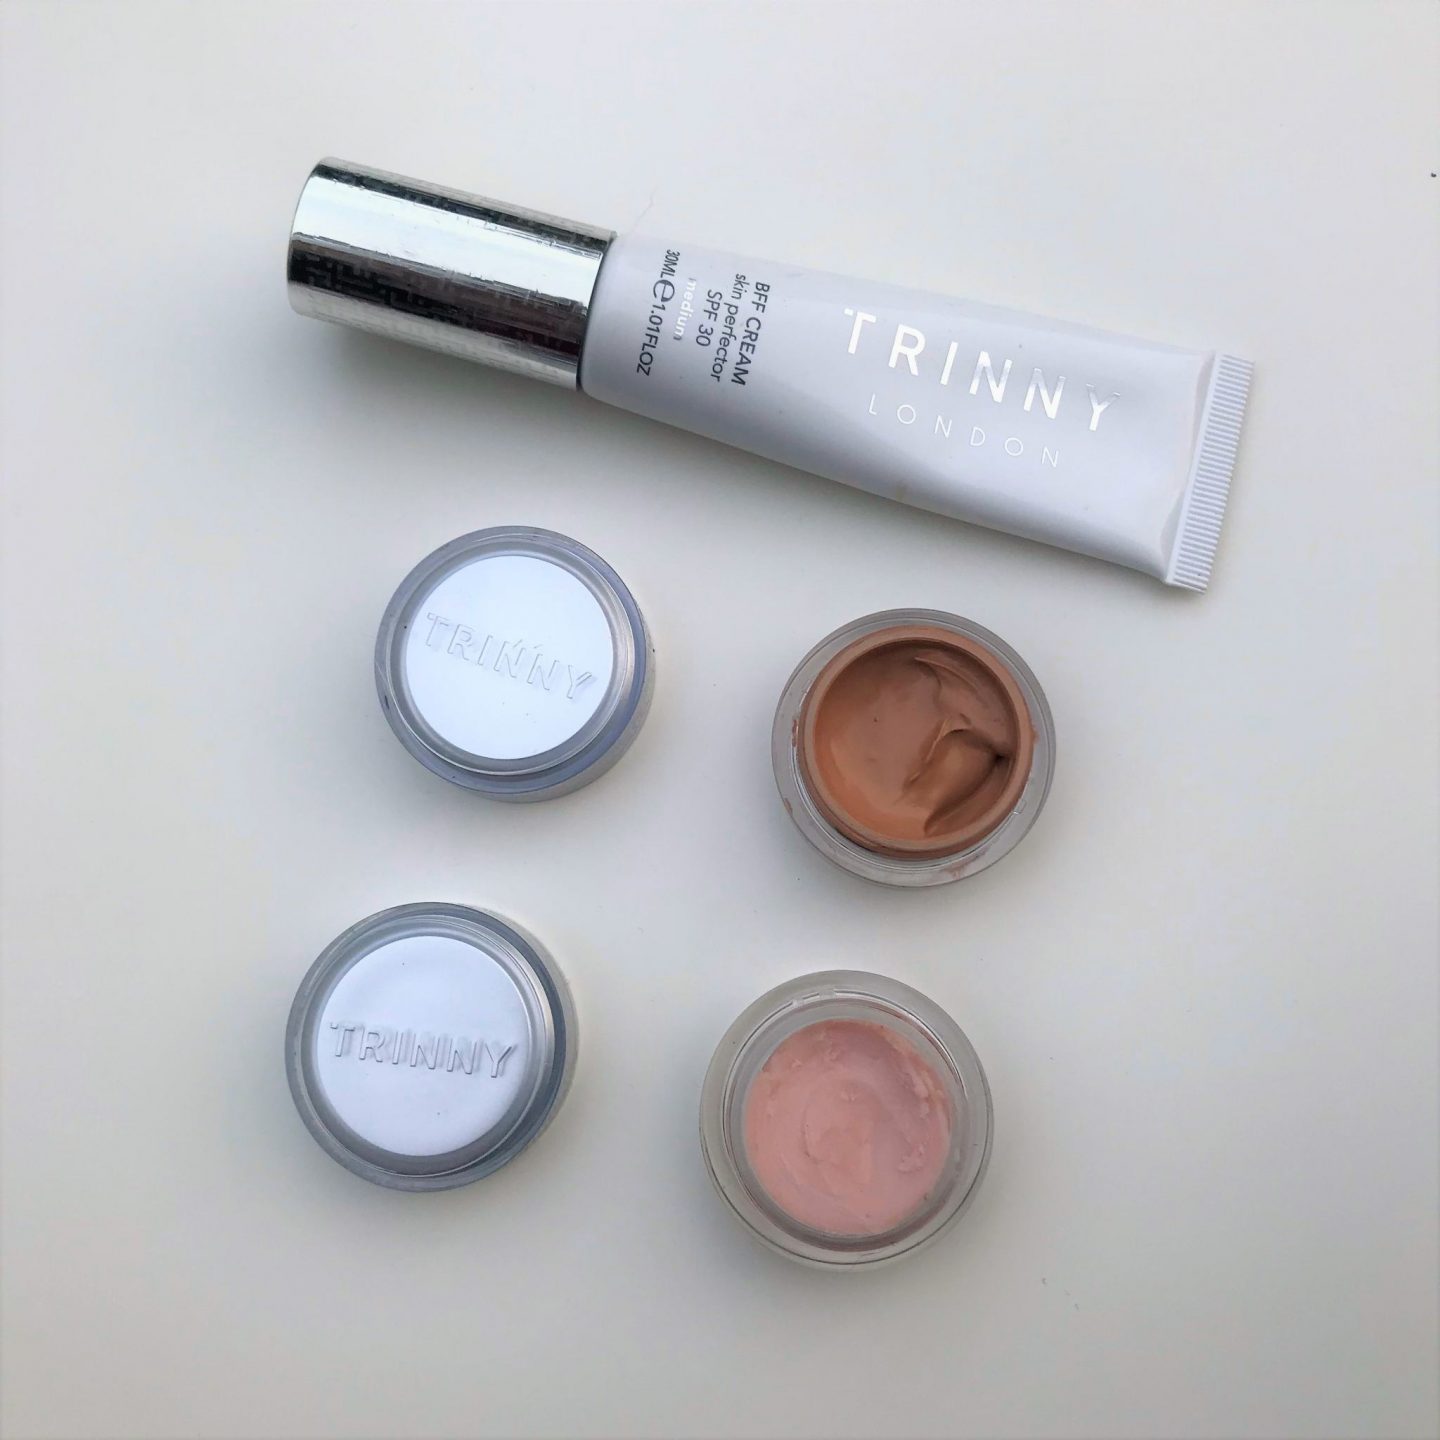 I've been looking forward to sharing these new items from Trinny London with you. I've trialled them for a couple of weeks to get the feel of how well they work